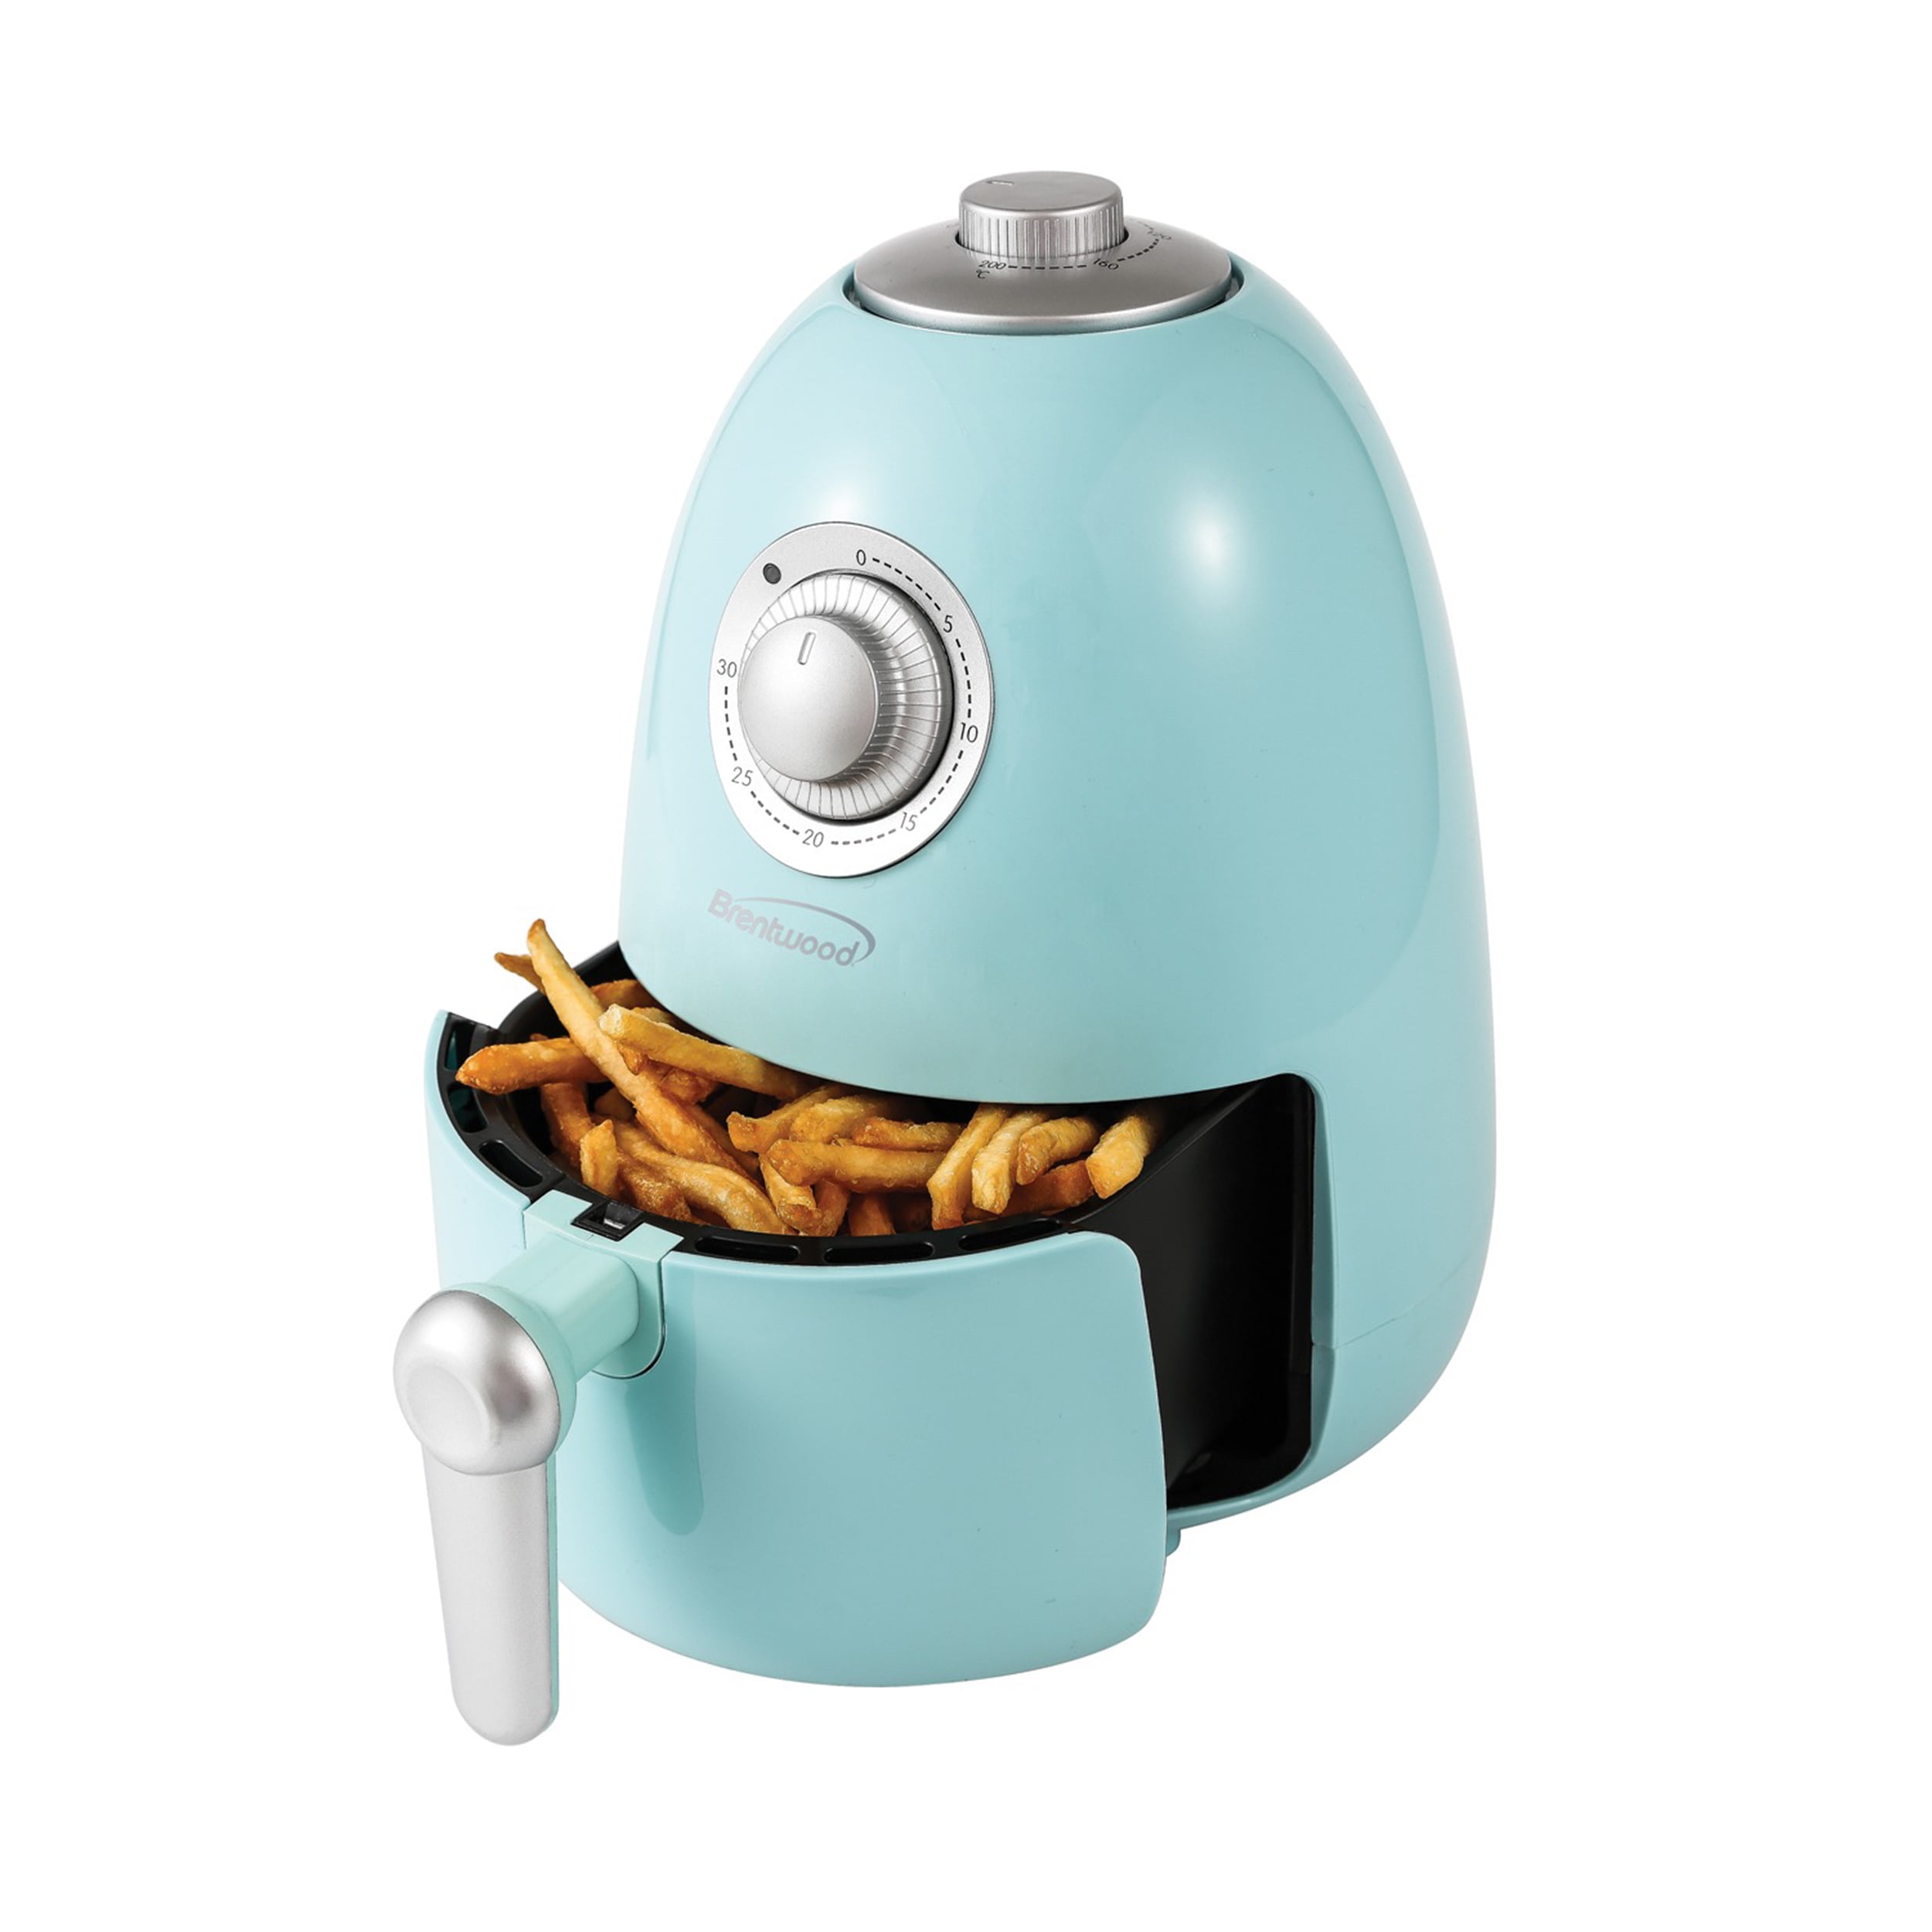 Brentwood Appliances AF-200BL 2-Quart Small Electric Air Fryer with Timer and Temperature Control (Blue)